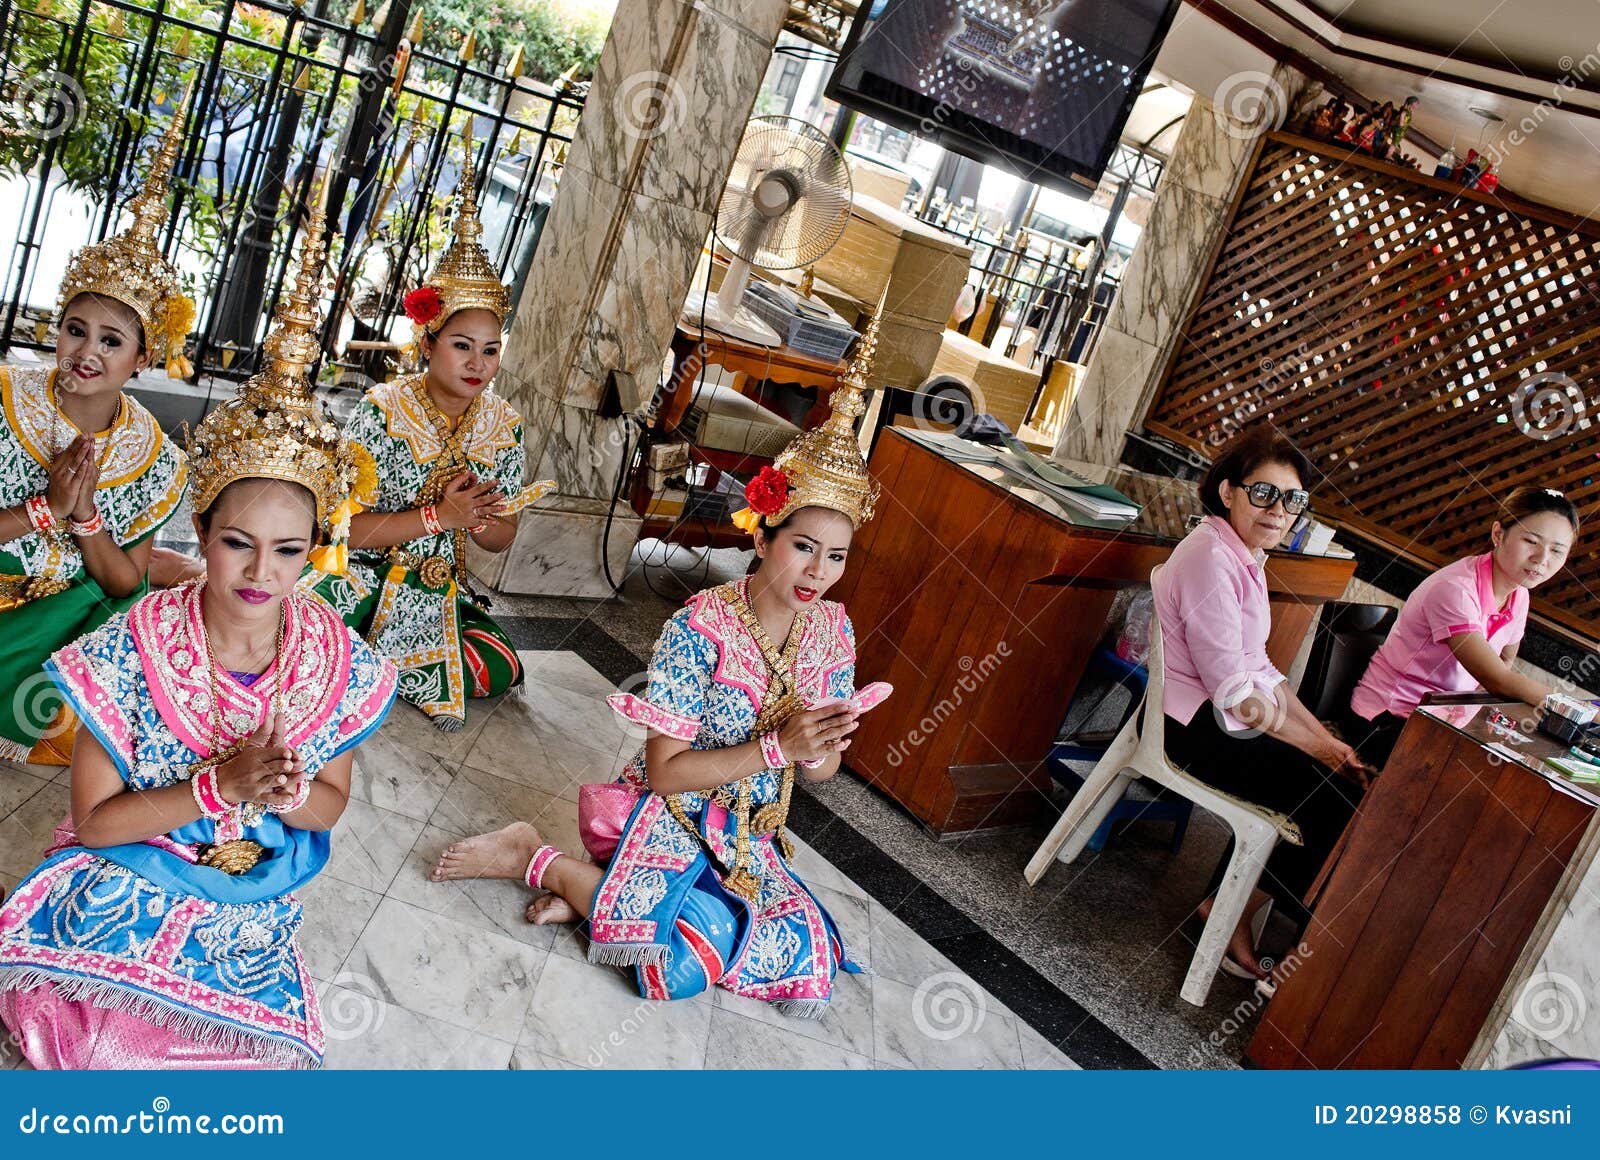 Thai Girls in Traditional Costumes Editorial Stock Photo - Image of ...